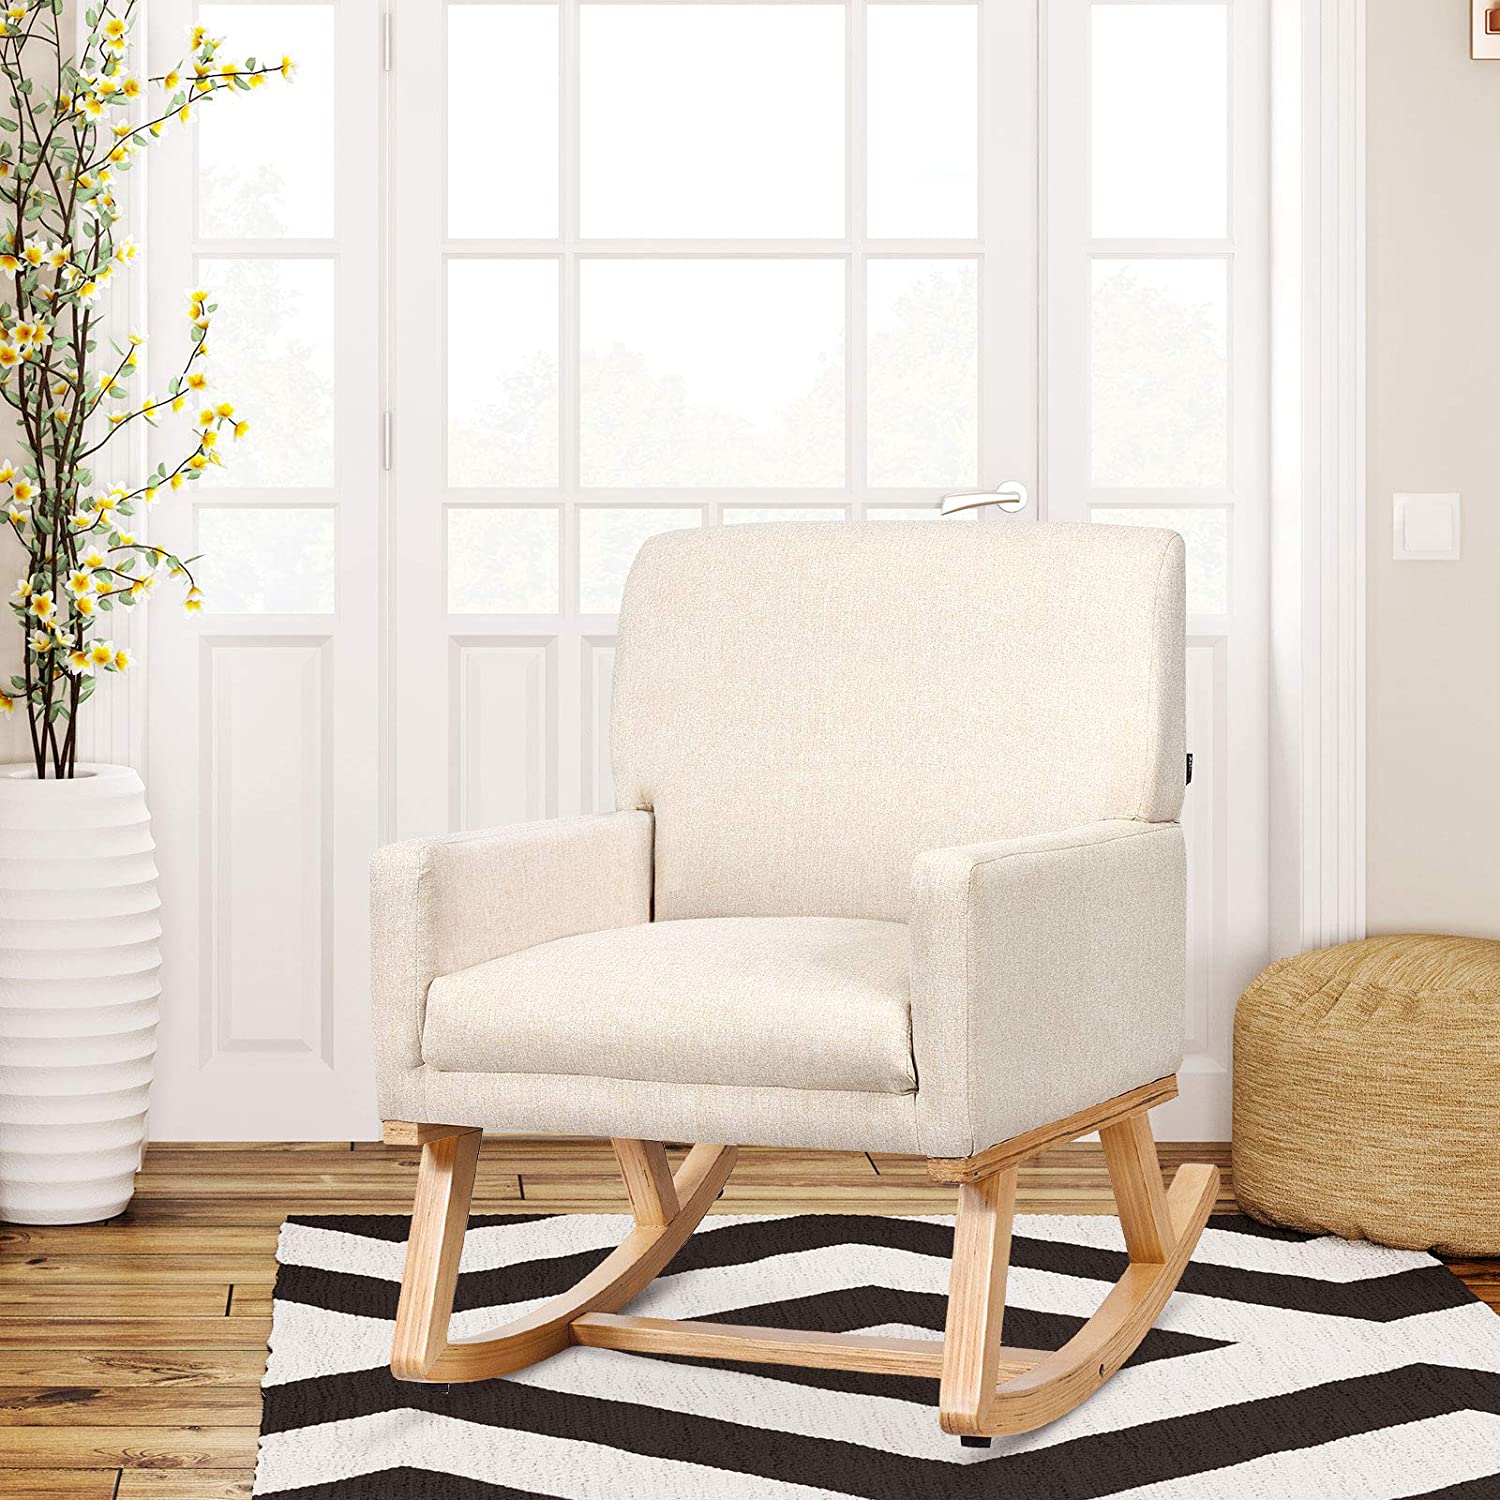 Giantex Upholstered Rocking Chair with Fabric Padded Seat and Solid Wood Base